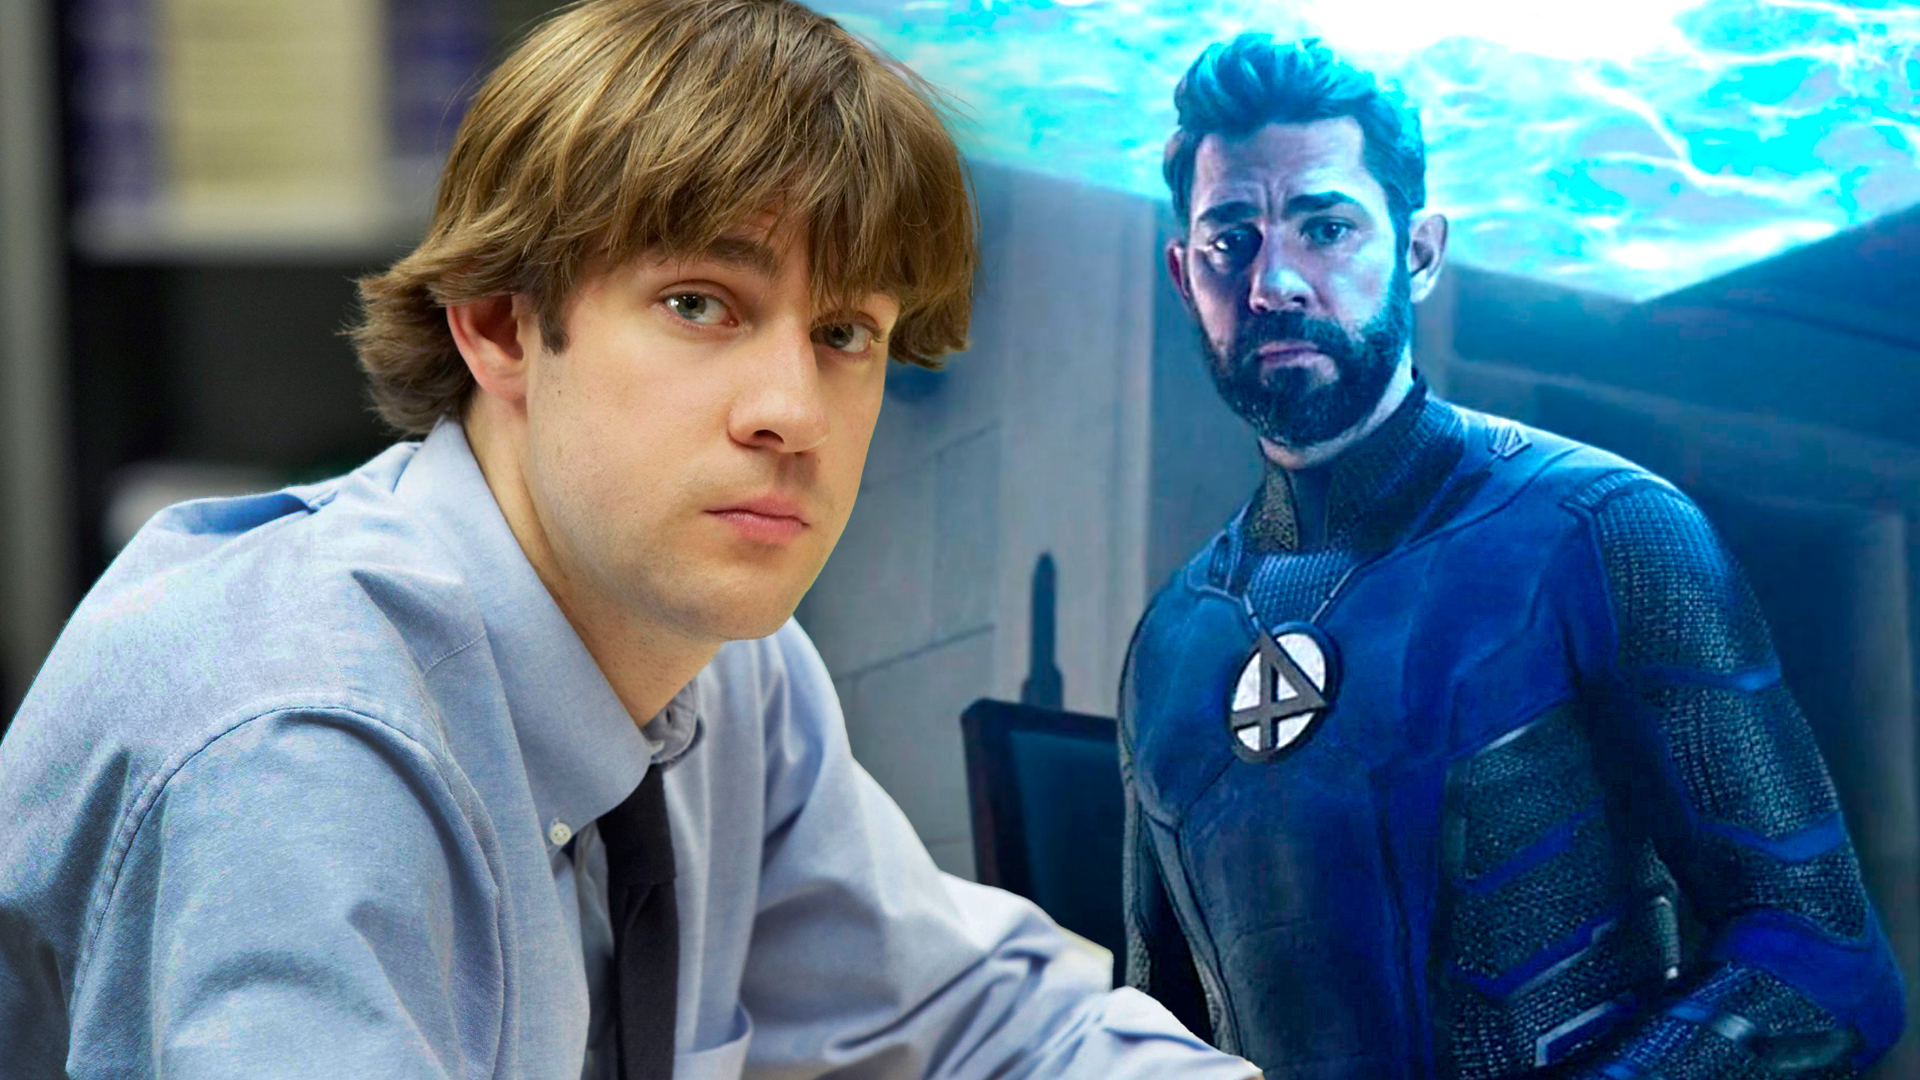 6 'The Office' Stars You Can Spot in the Marvel Universe